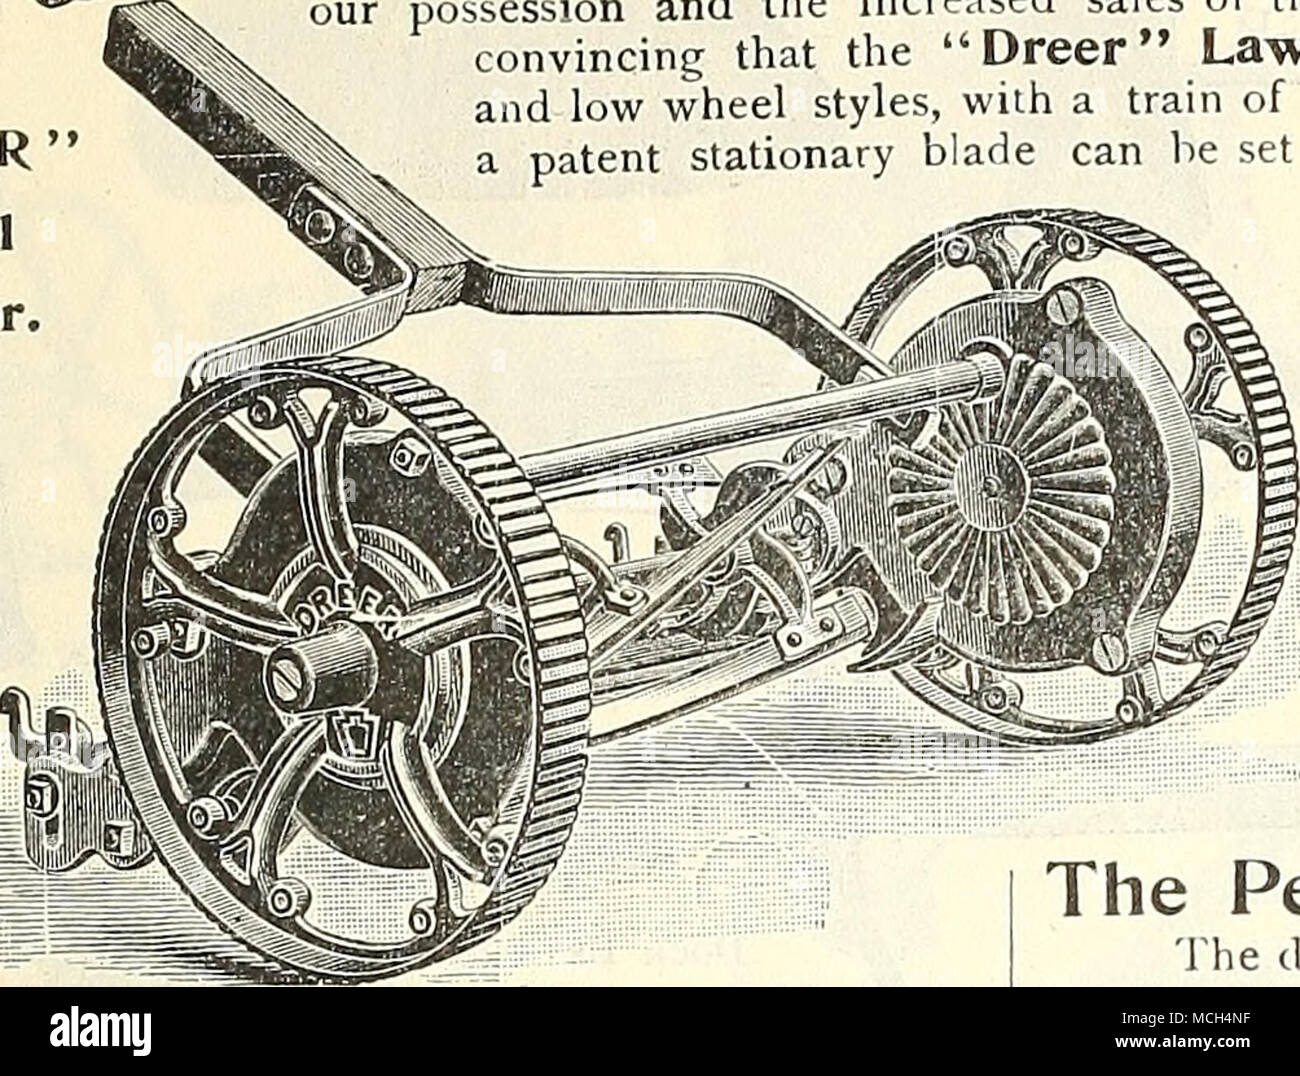 . For full description of Mowers,Tools and Implements, see Dreer's Tool Catalogue. Mailed on application. Prices of the »« Dreer &quot; High-Wheel flower. 15-inch cut, 4 blades, $8 50; 5 blades 19 50 17 &quot; 4 &quot; 9 50; 5 &quot; 10 50 19 &quot; 4 &quot; 10 50; 5 &quot; 11 50 21 &quot; 4 &quot; 11 50; 5 &quot; 12 50 Prices of the &quot; Dreer&quot; Low=Wheel Mower. 12inch $6 00; 16-inch $7 50 14 &quot; 7 00; 18 &quot; 8 50 Grass Catchers for the &quot; Dreer &quot; Mowers. 12-inch, $1.40; 14-inch, $1.50 ; 16-inch, $1.60 ; 18-inch, $1.70; 15-inch, $1.60; 17-inch, $1.70; 19-inch, $1 80; 21-i Stock Photo